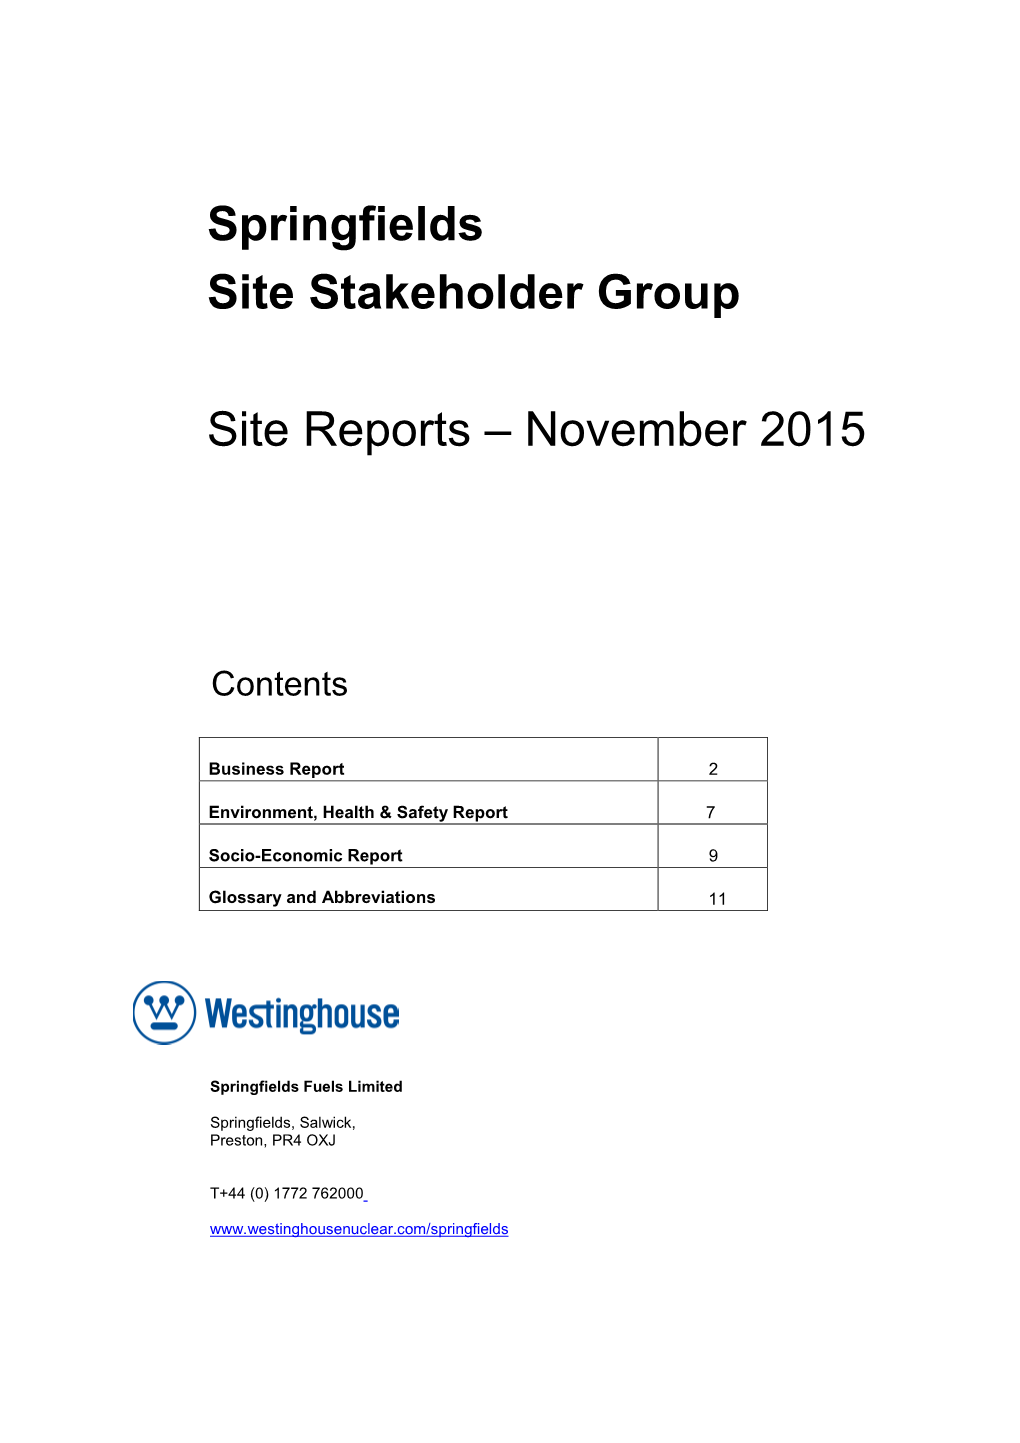 Springfields Site Stakeholder Group Site Reports – November 2015